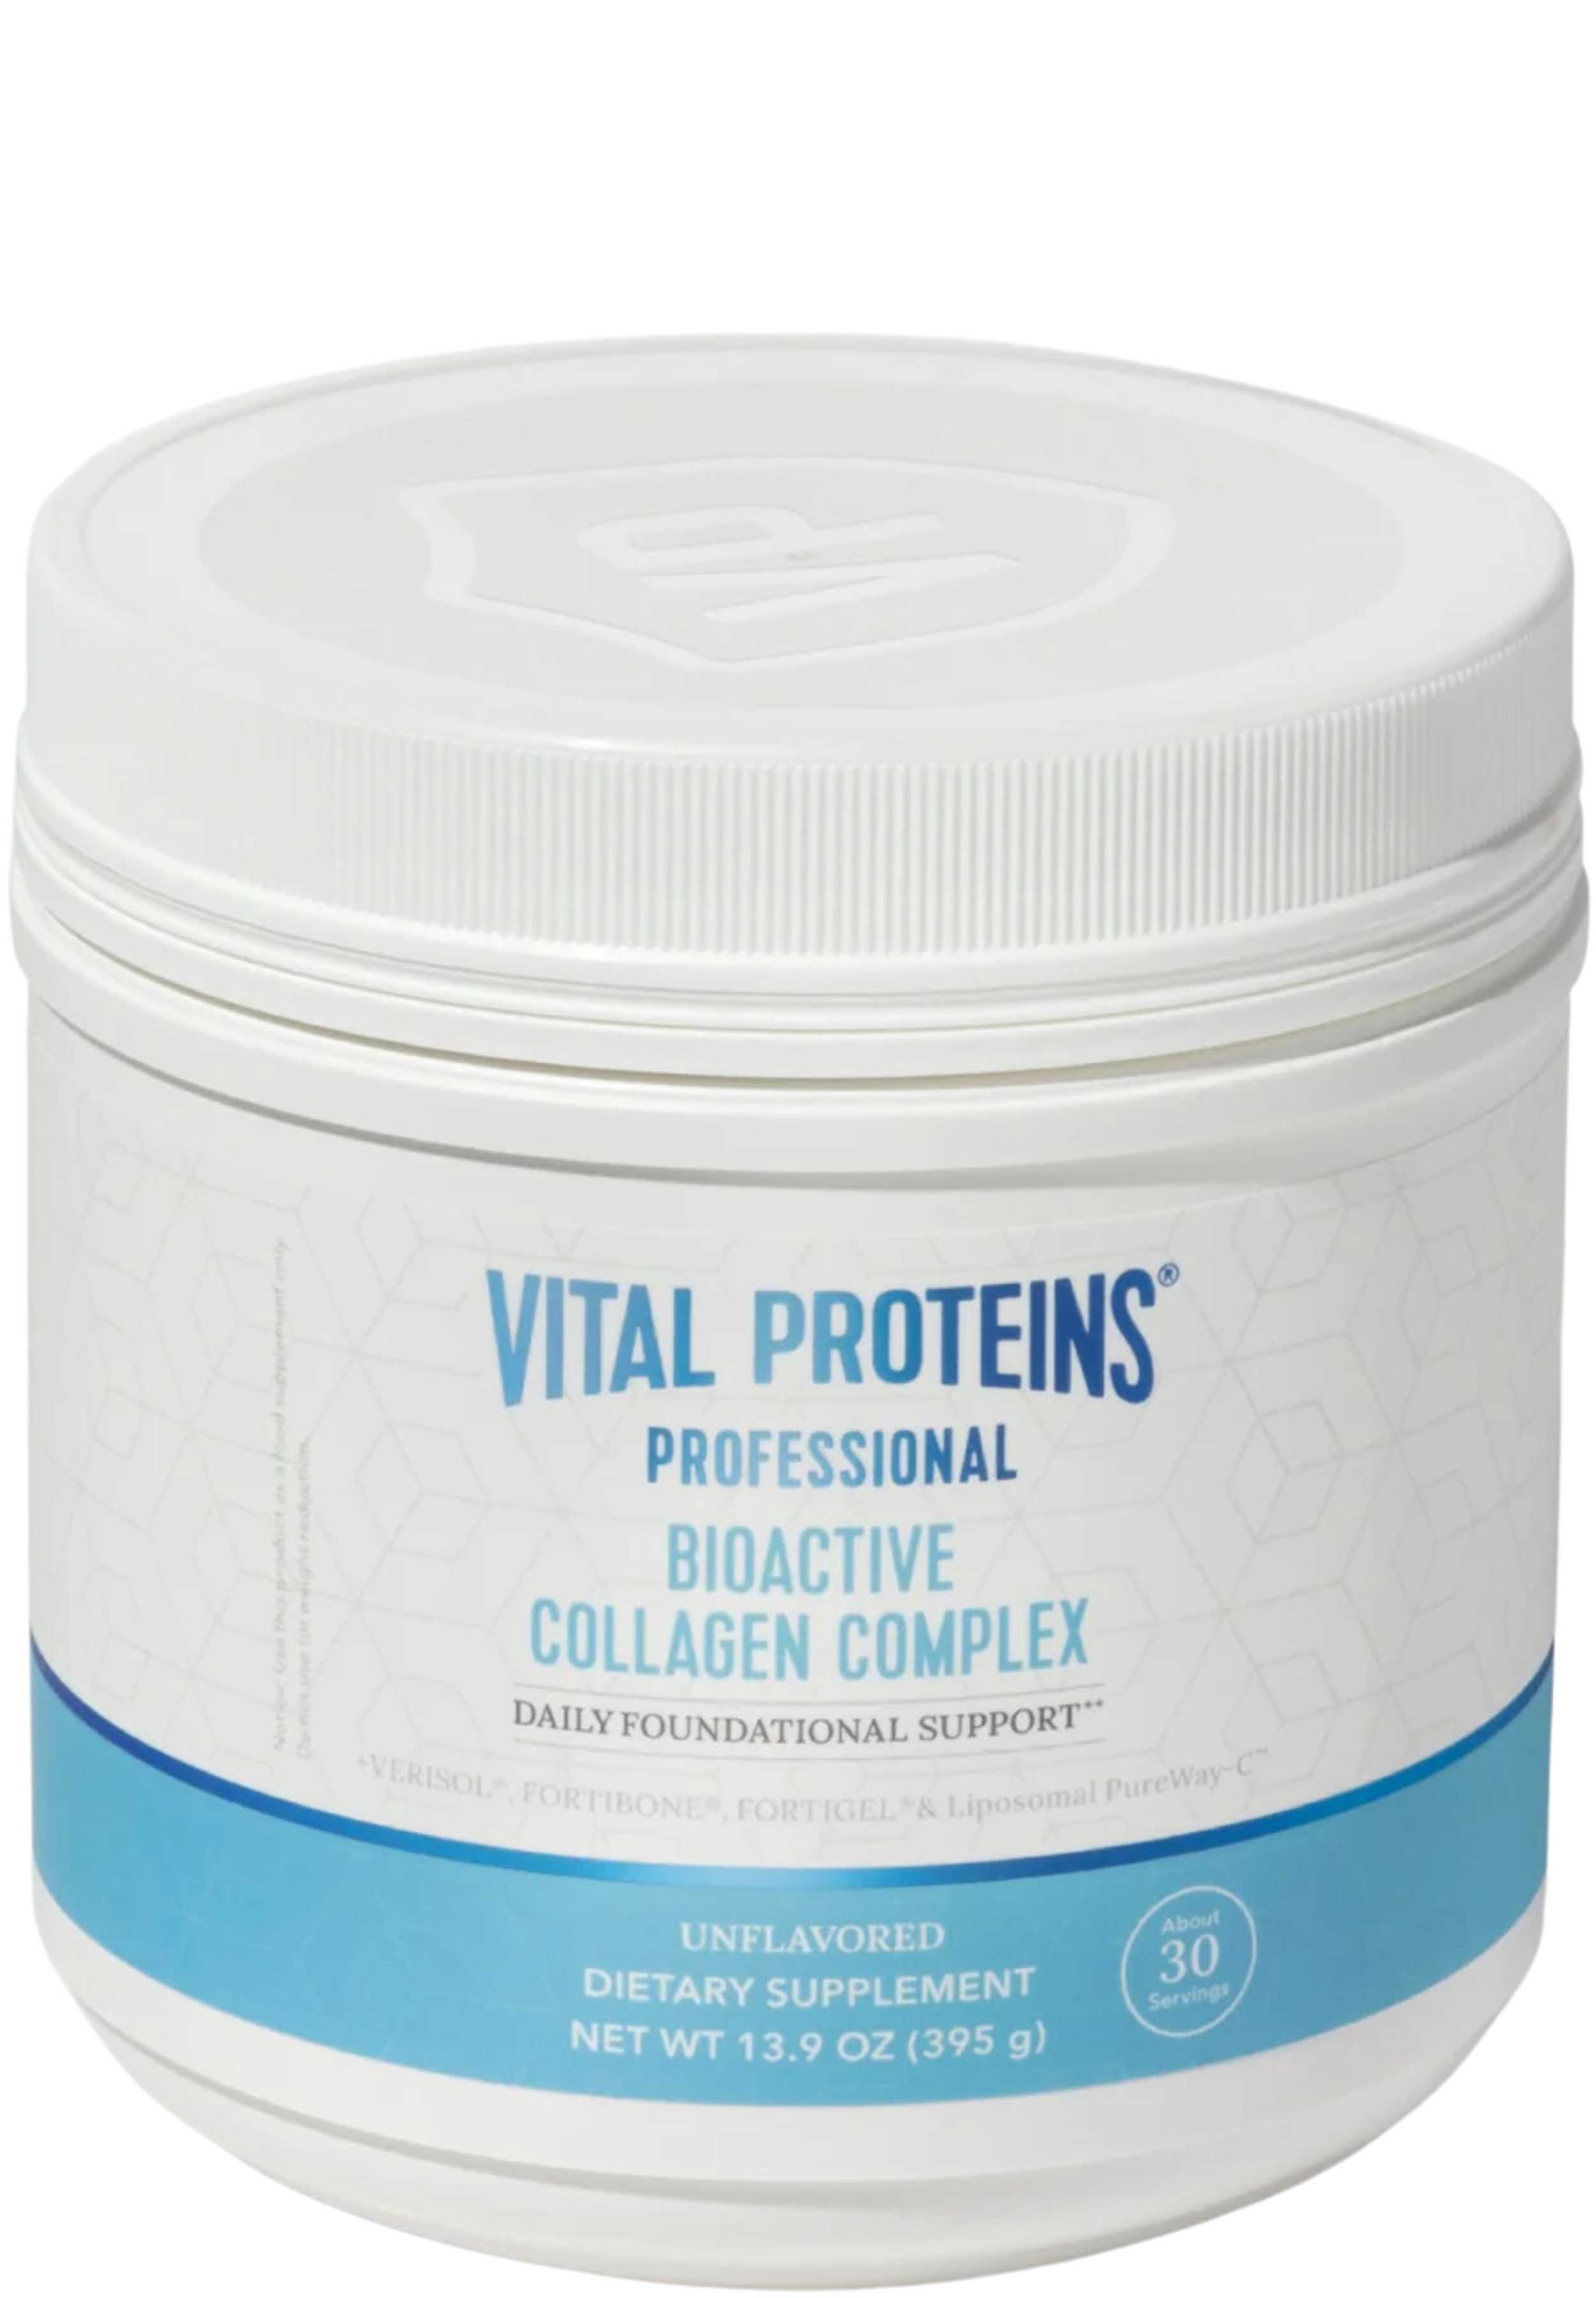 Vital Proteins Bioactive Collagen Complex Daily Foundational Support